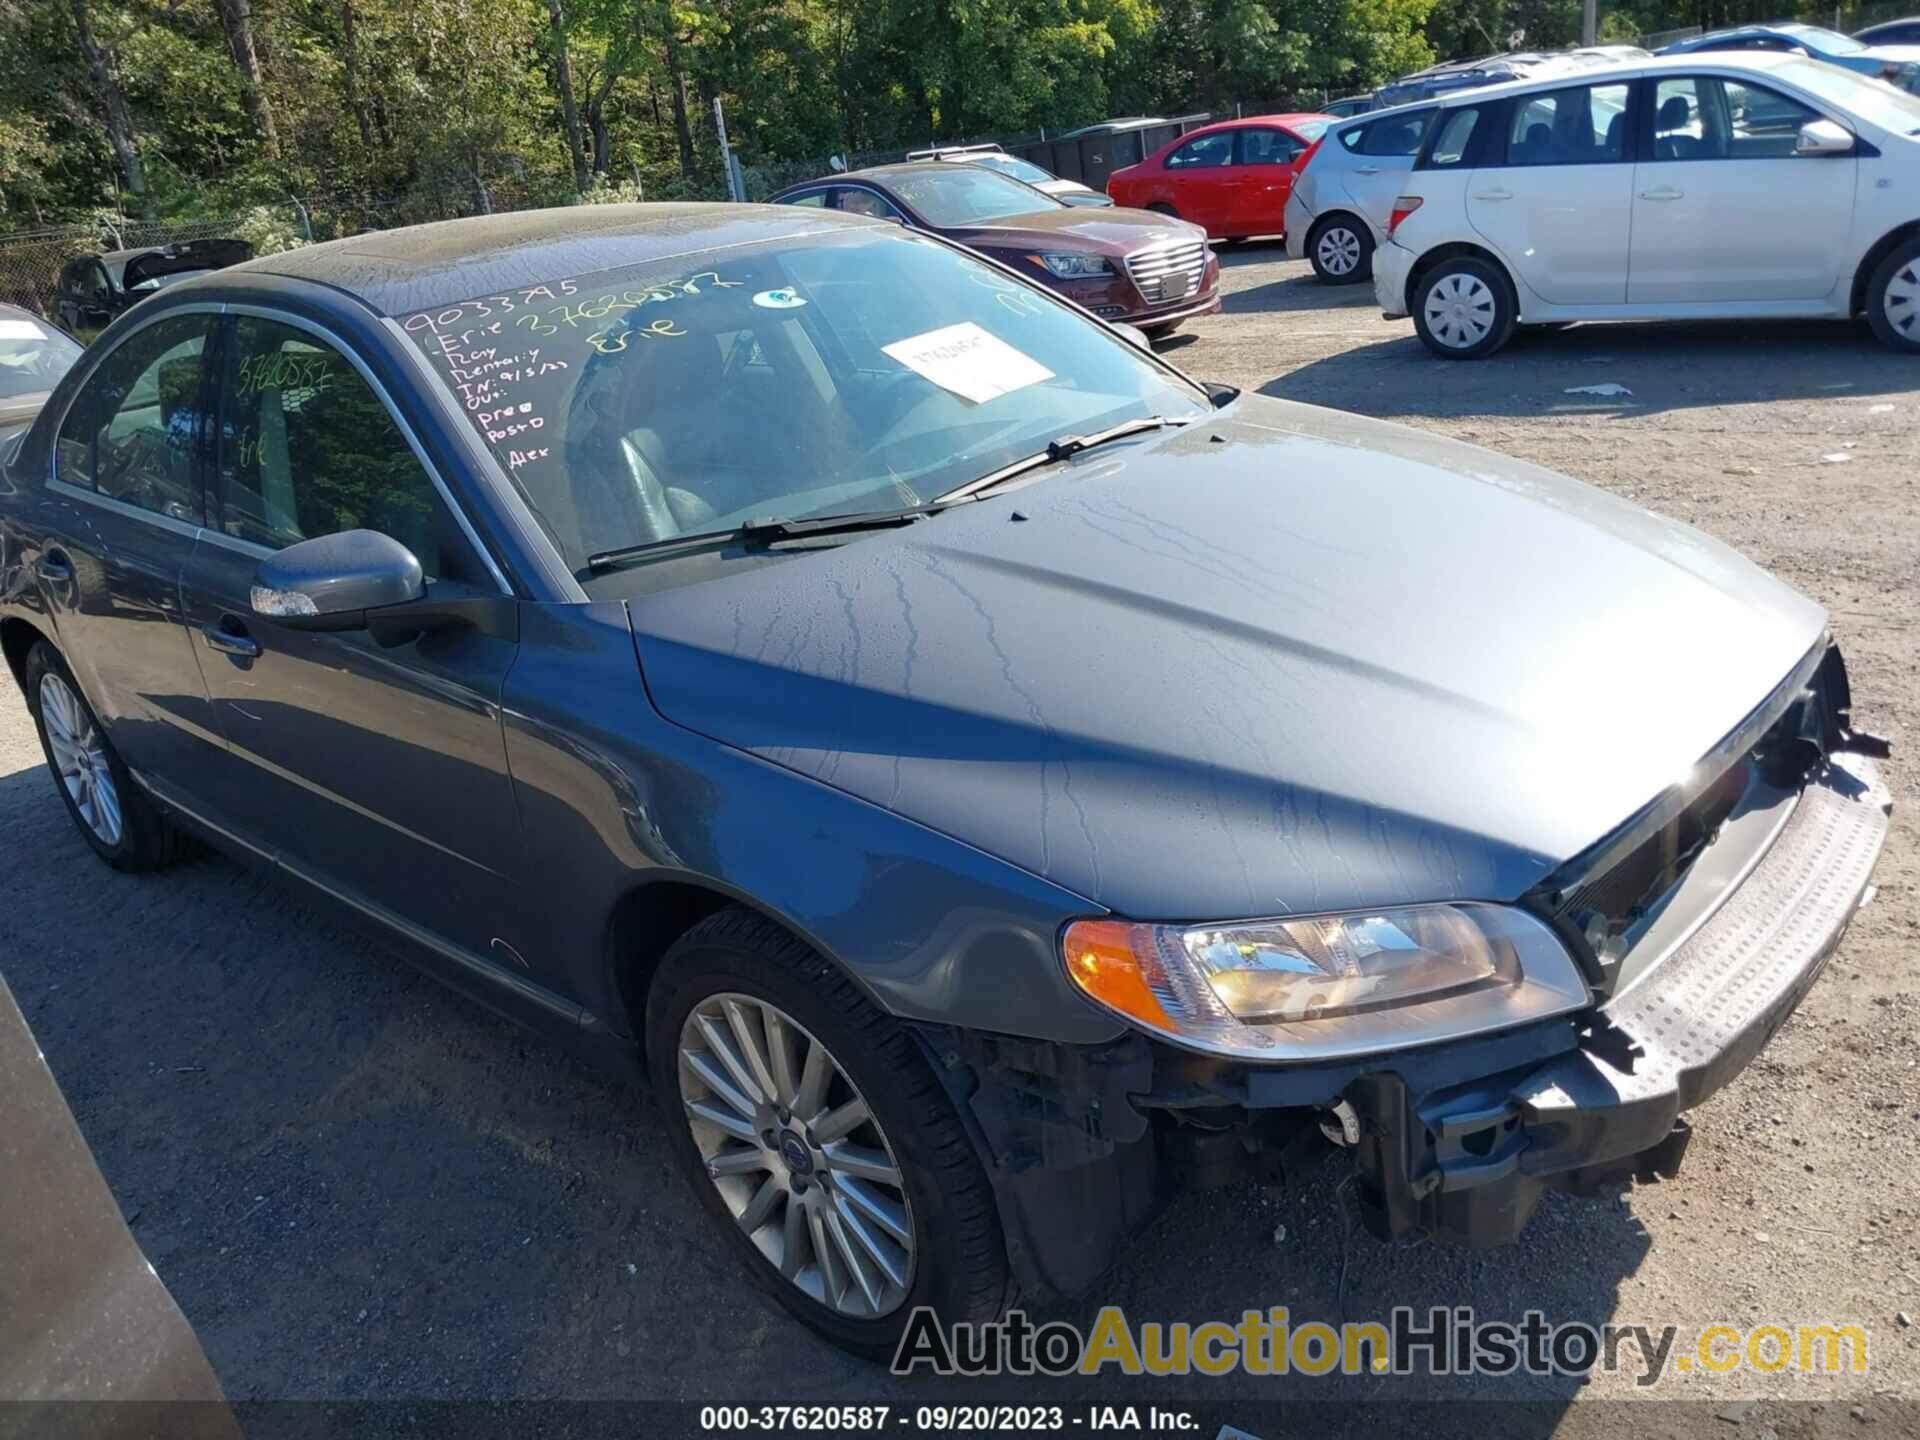 VOLVO S80 3.2L, YV1AS982981052851